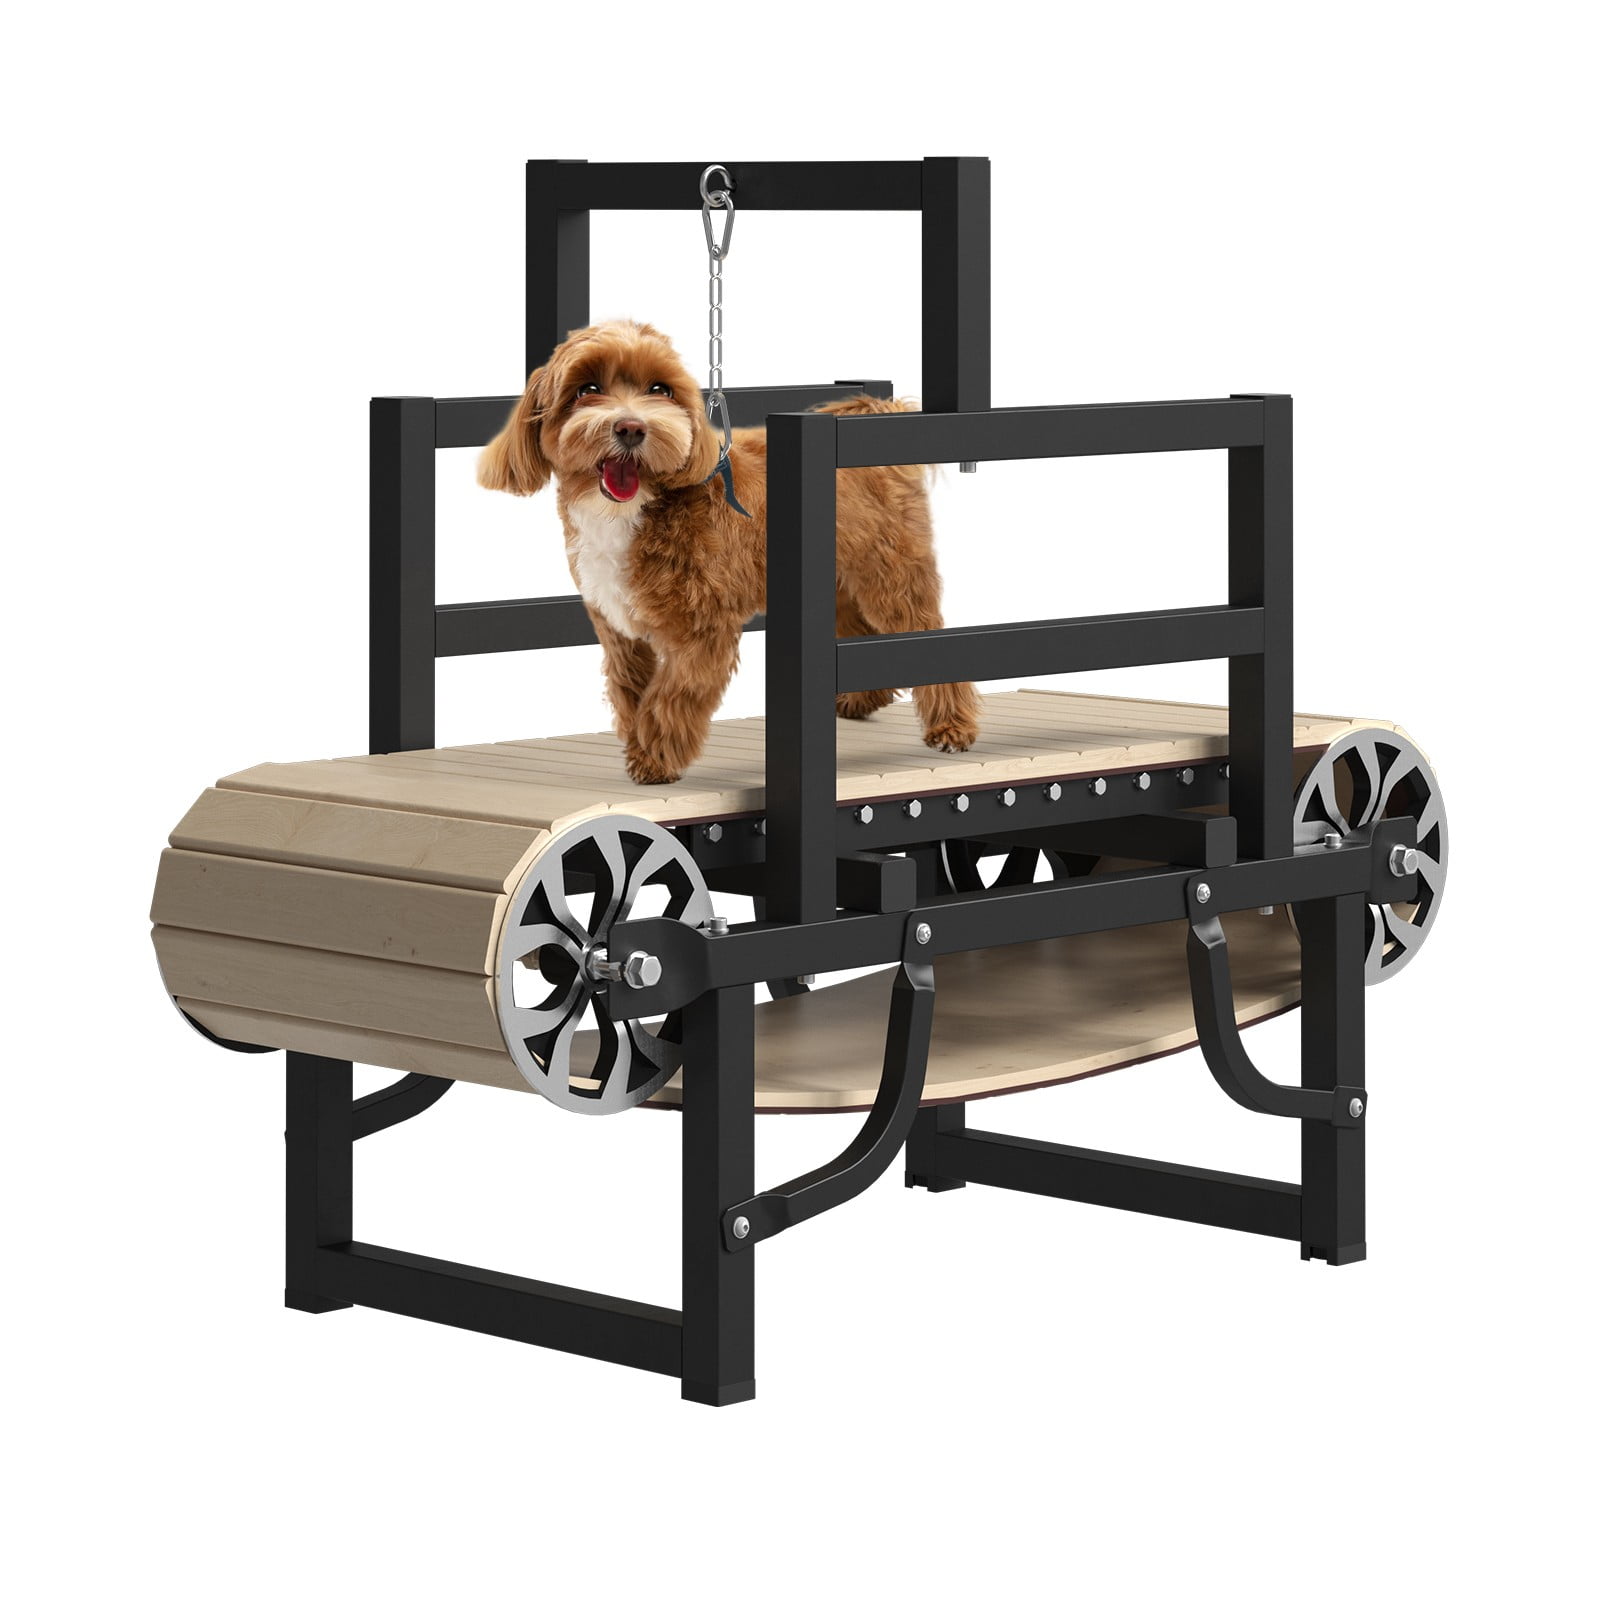 Syedee Dog Treadmill For Small Dogs Doggy Pacer No Motor Fit And Health 250lb Weight Capacity Com